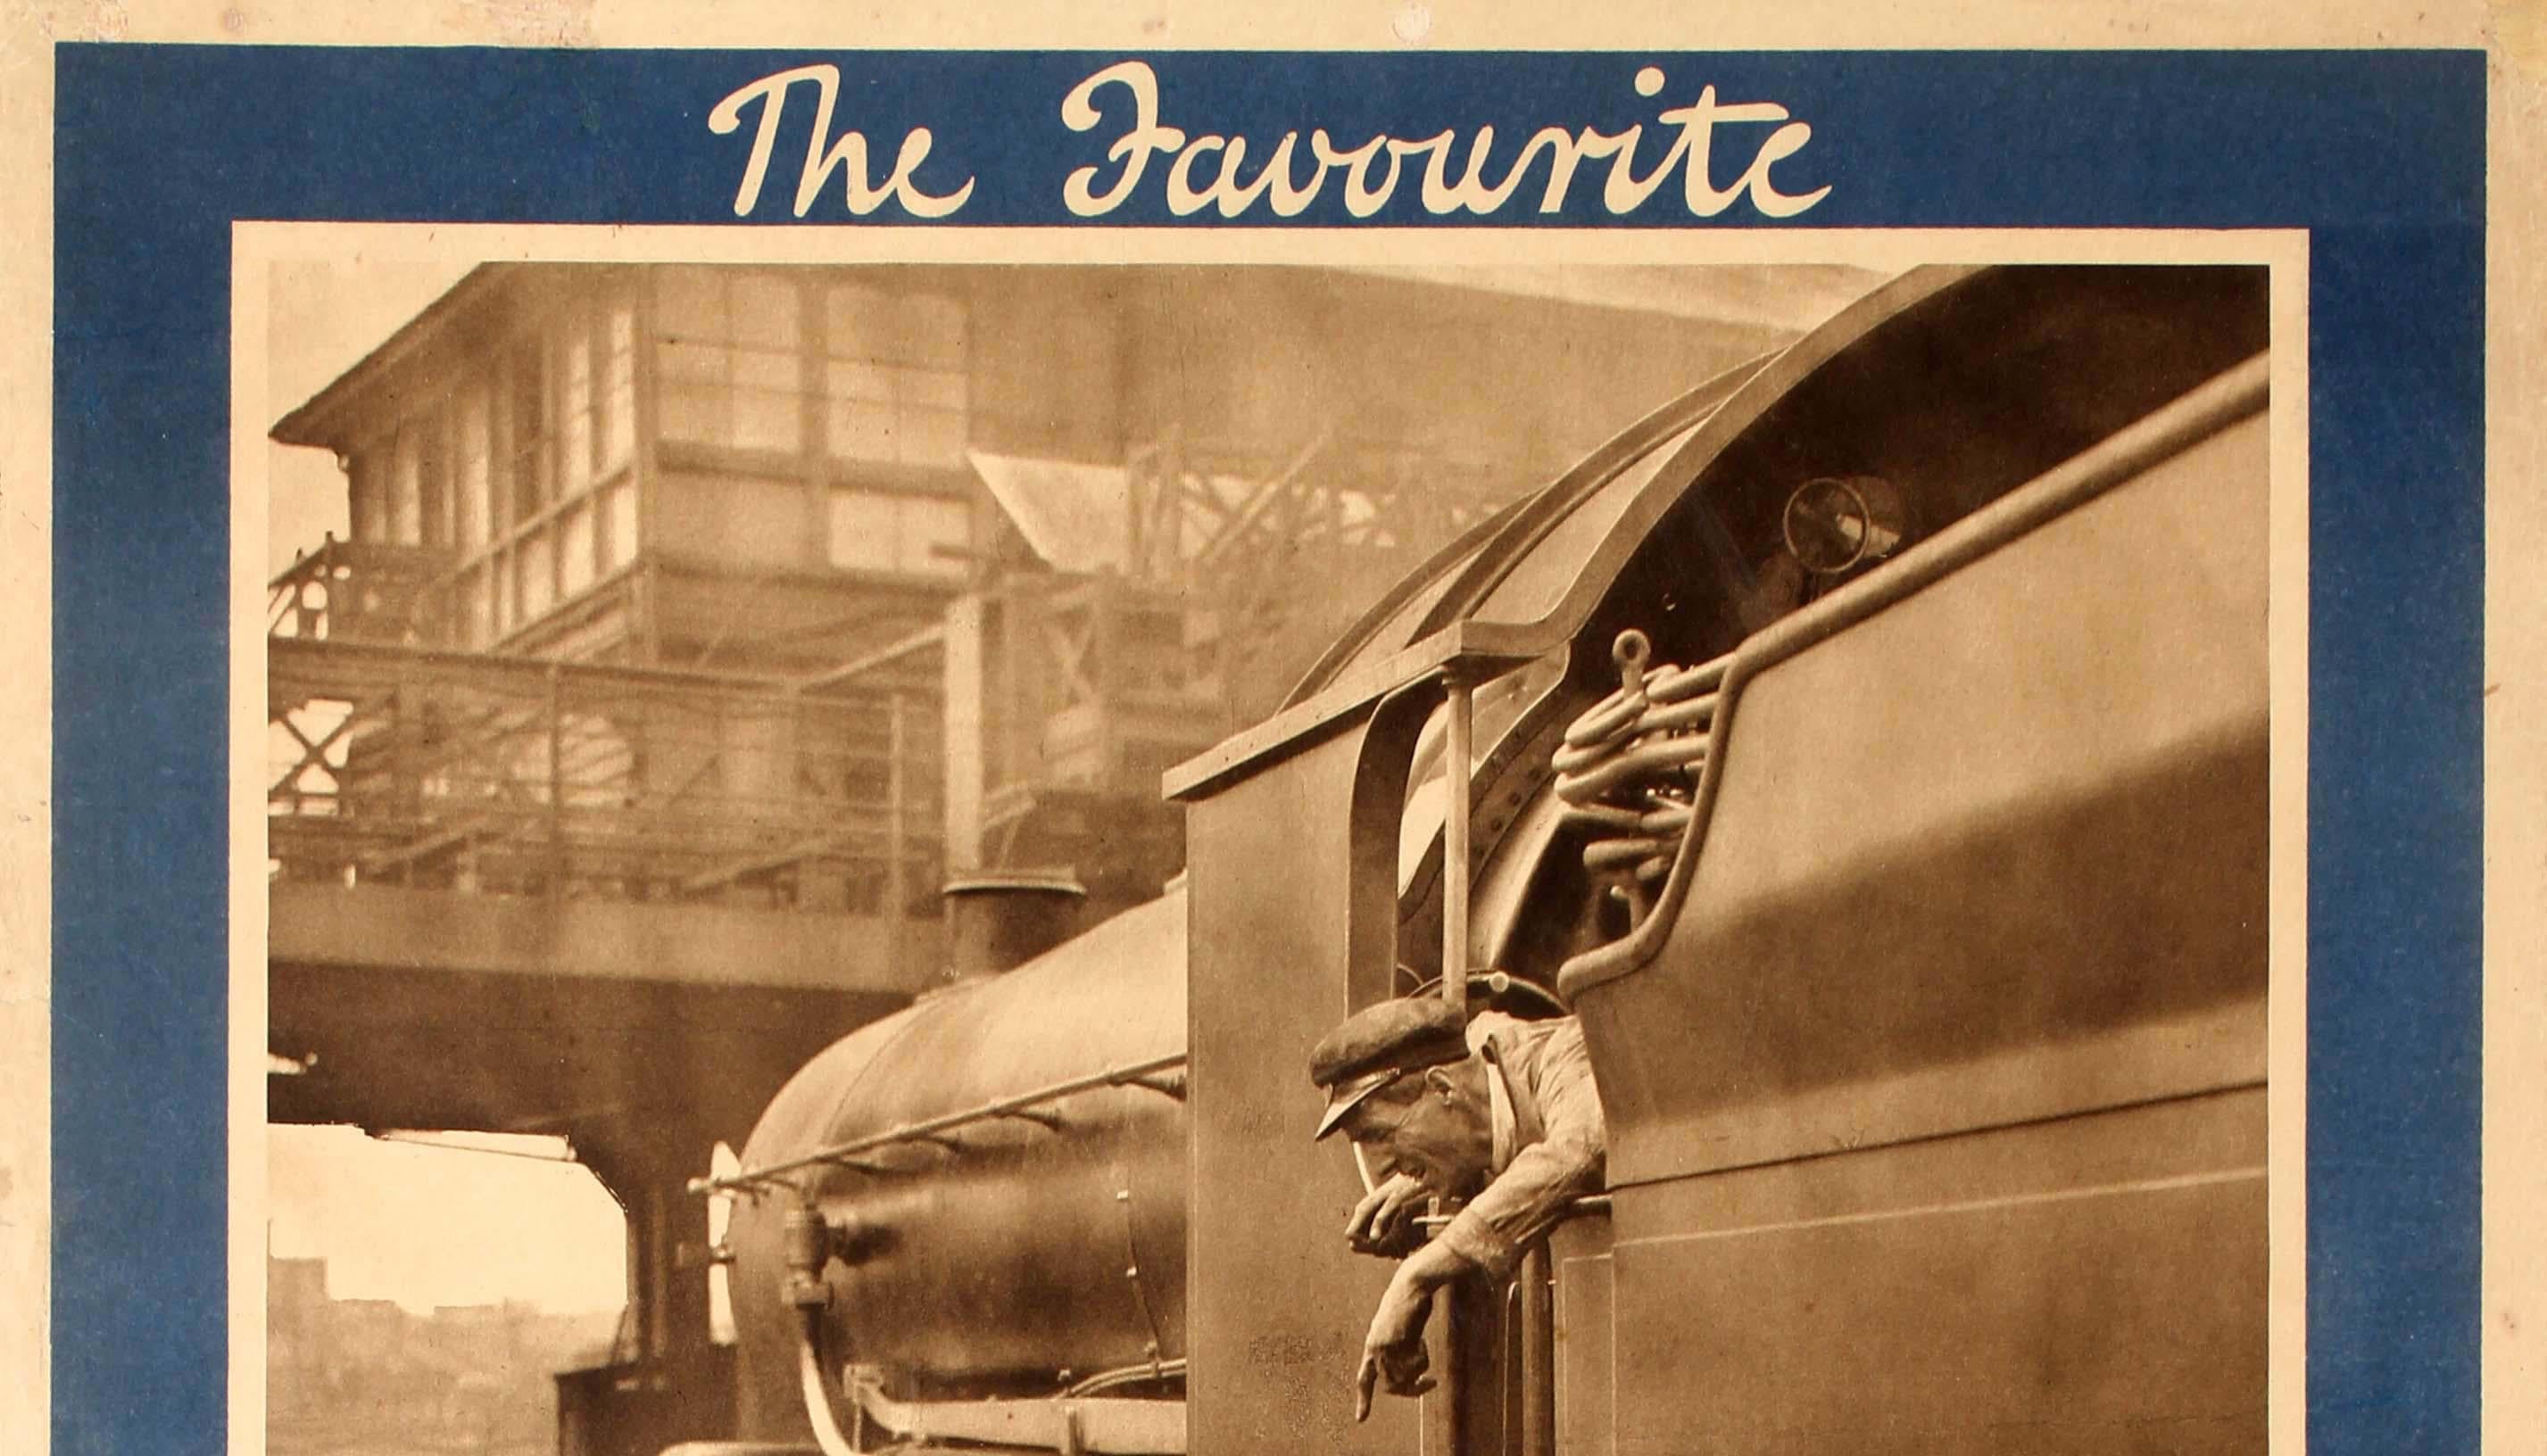 Original vintage train travel advertising poster promoting Southern Railway featuring a fantastic framed design showing a black and white photograph of a smiling young girl standing on a platform and holding a small suitcase, looking up at a train